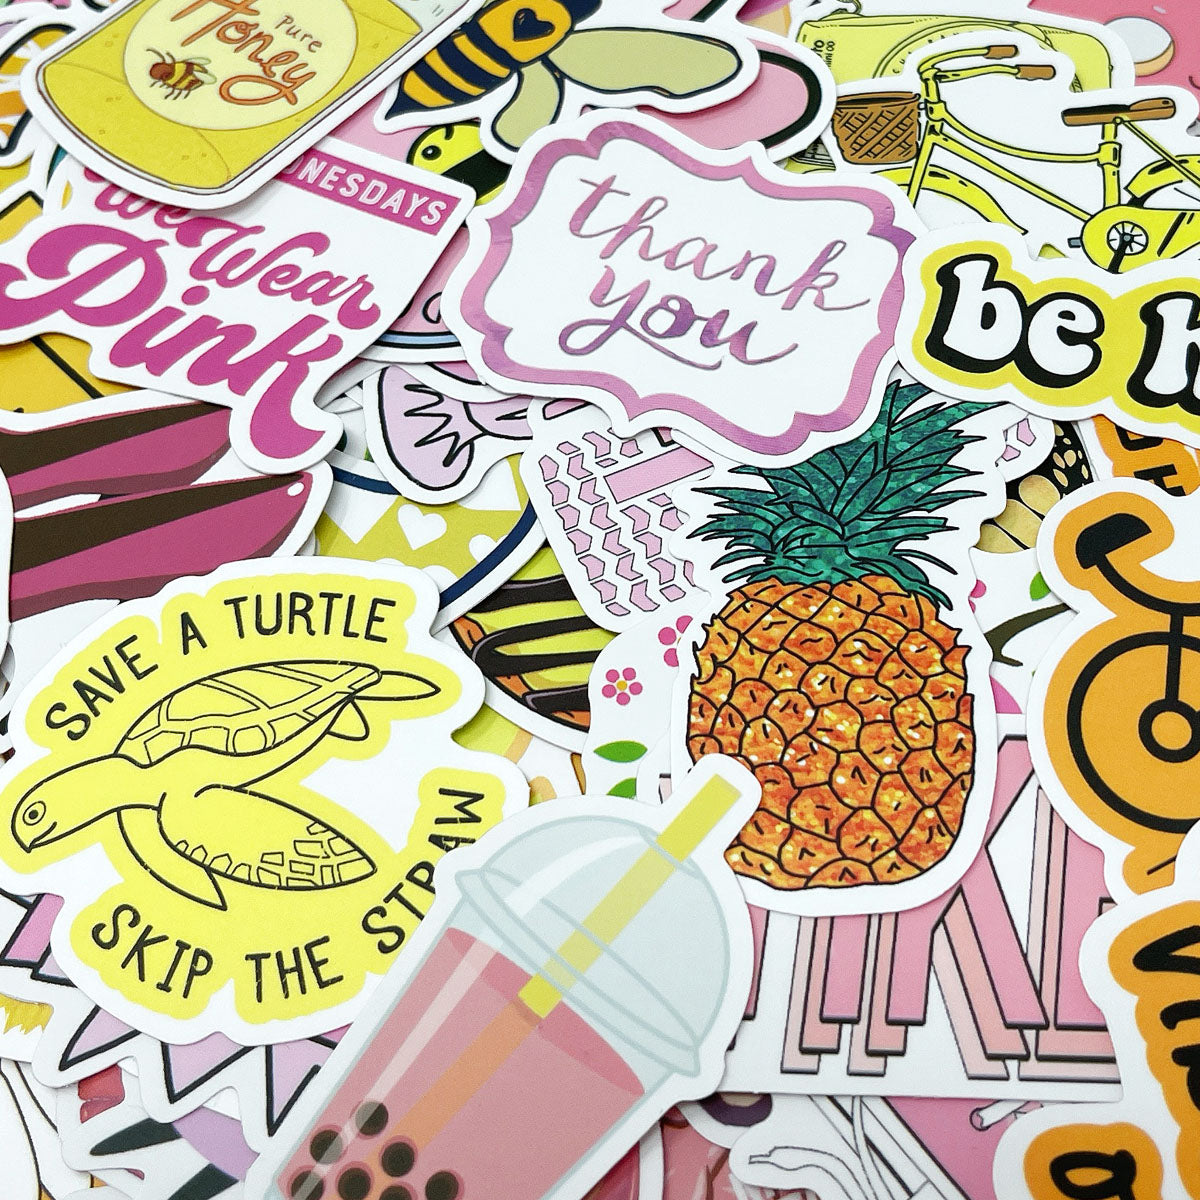 Wrapables Waterproof Vinyl Stickers for Water Bottles, Laptop, Phones, Skateboards, Decals for Teens 100pcs Christmas